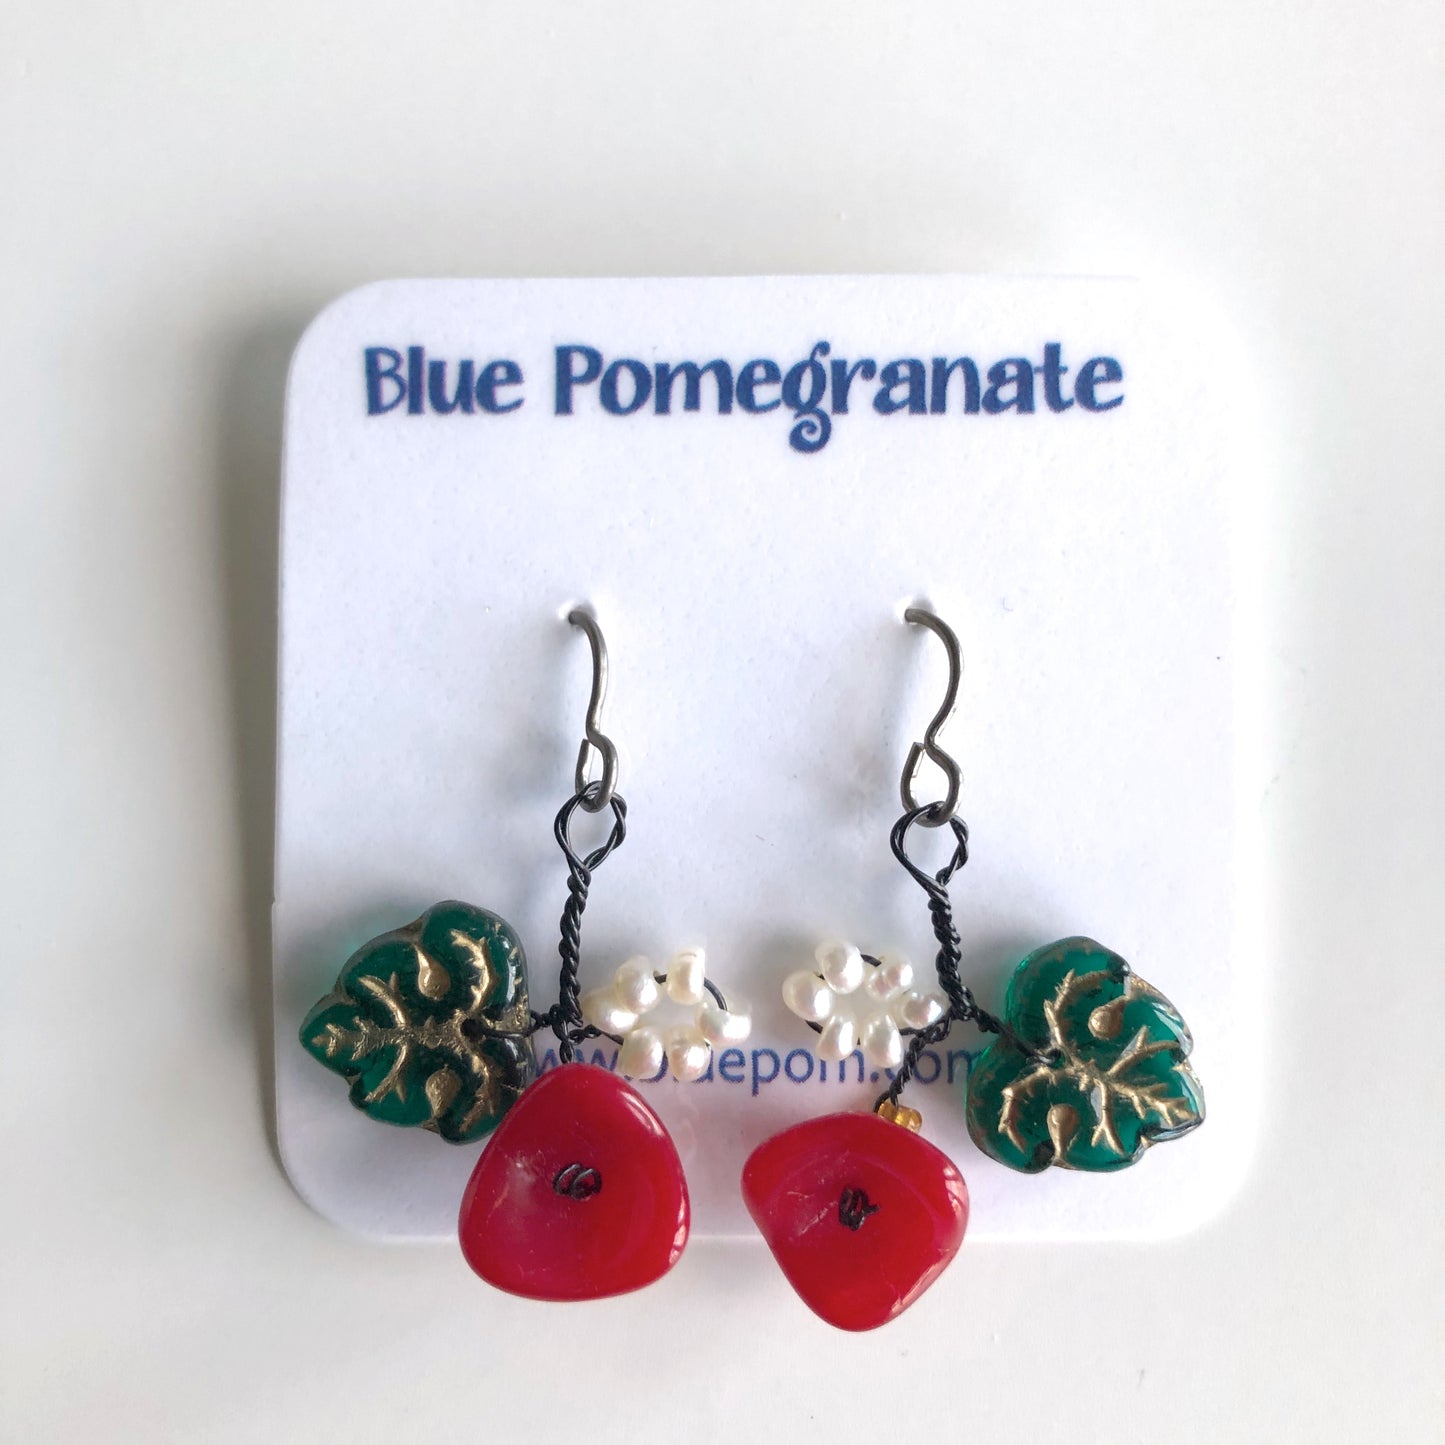 Flower Cluster Earrings, Warm Colors by Mary Lowe - © Blue Pomegranate Gallery